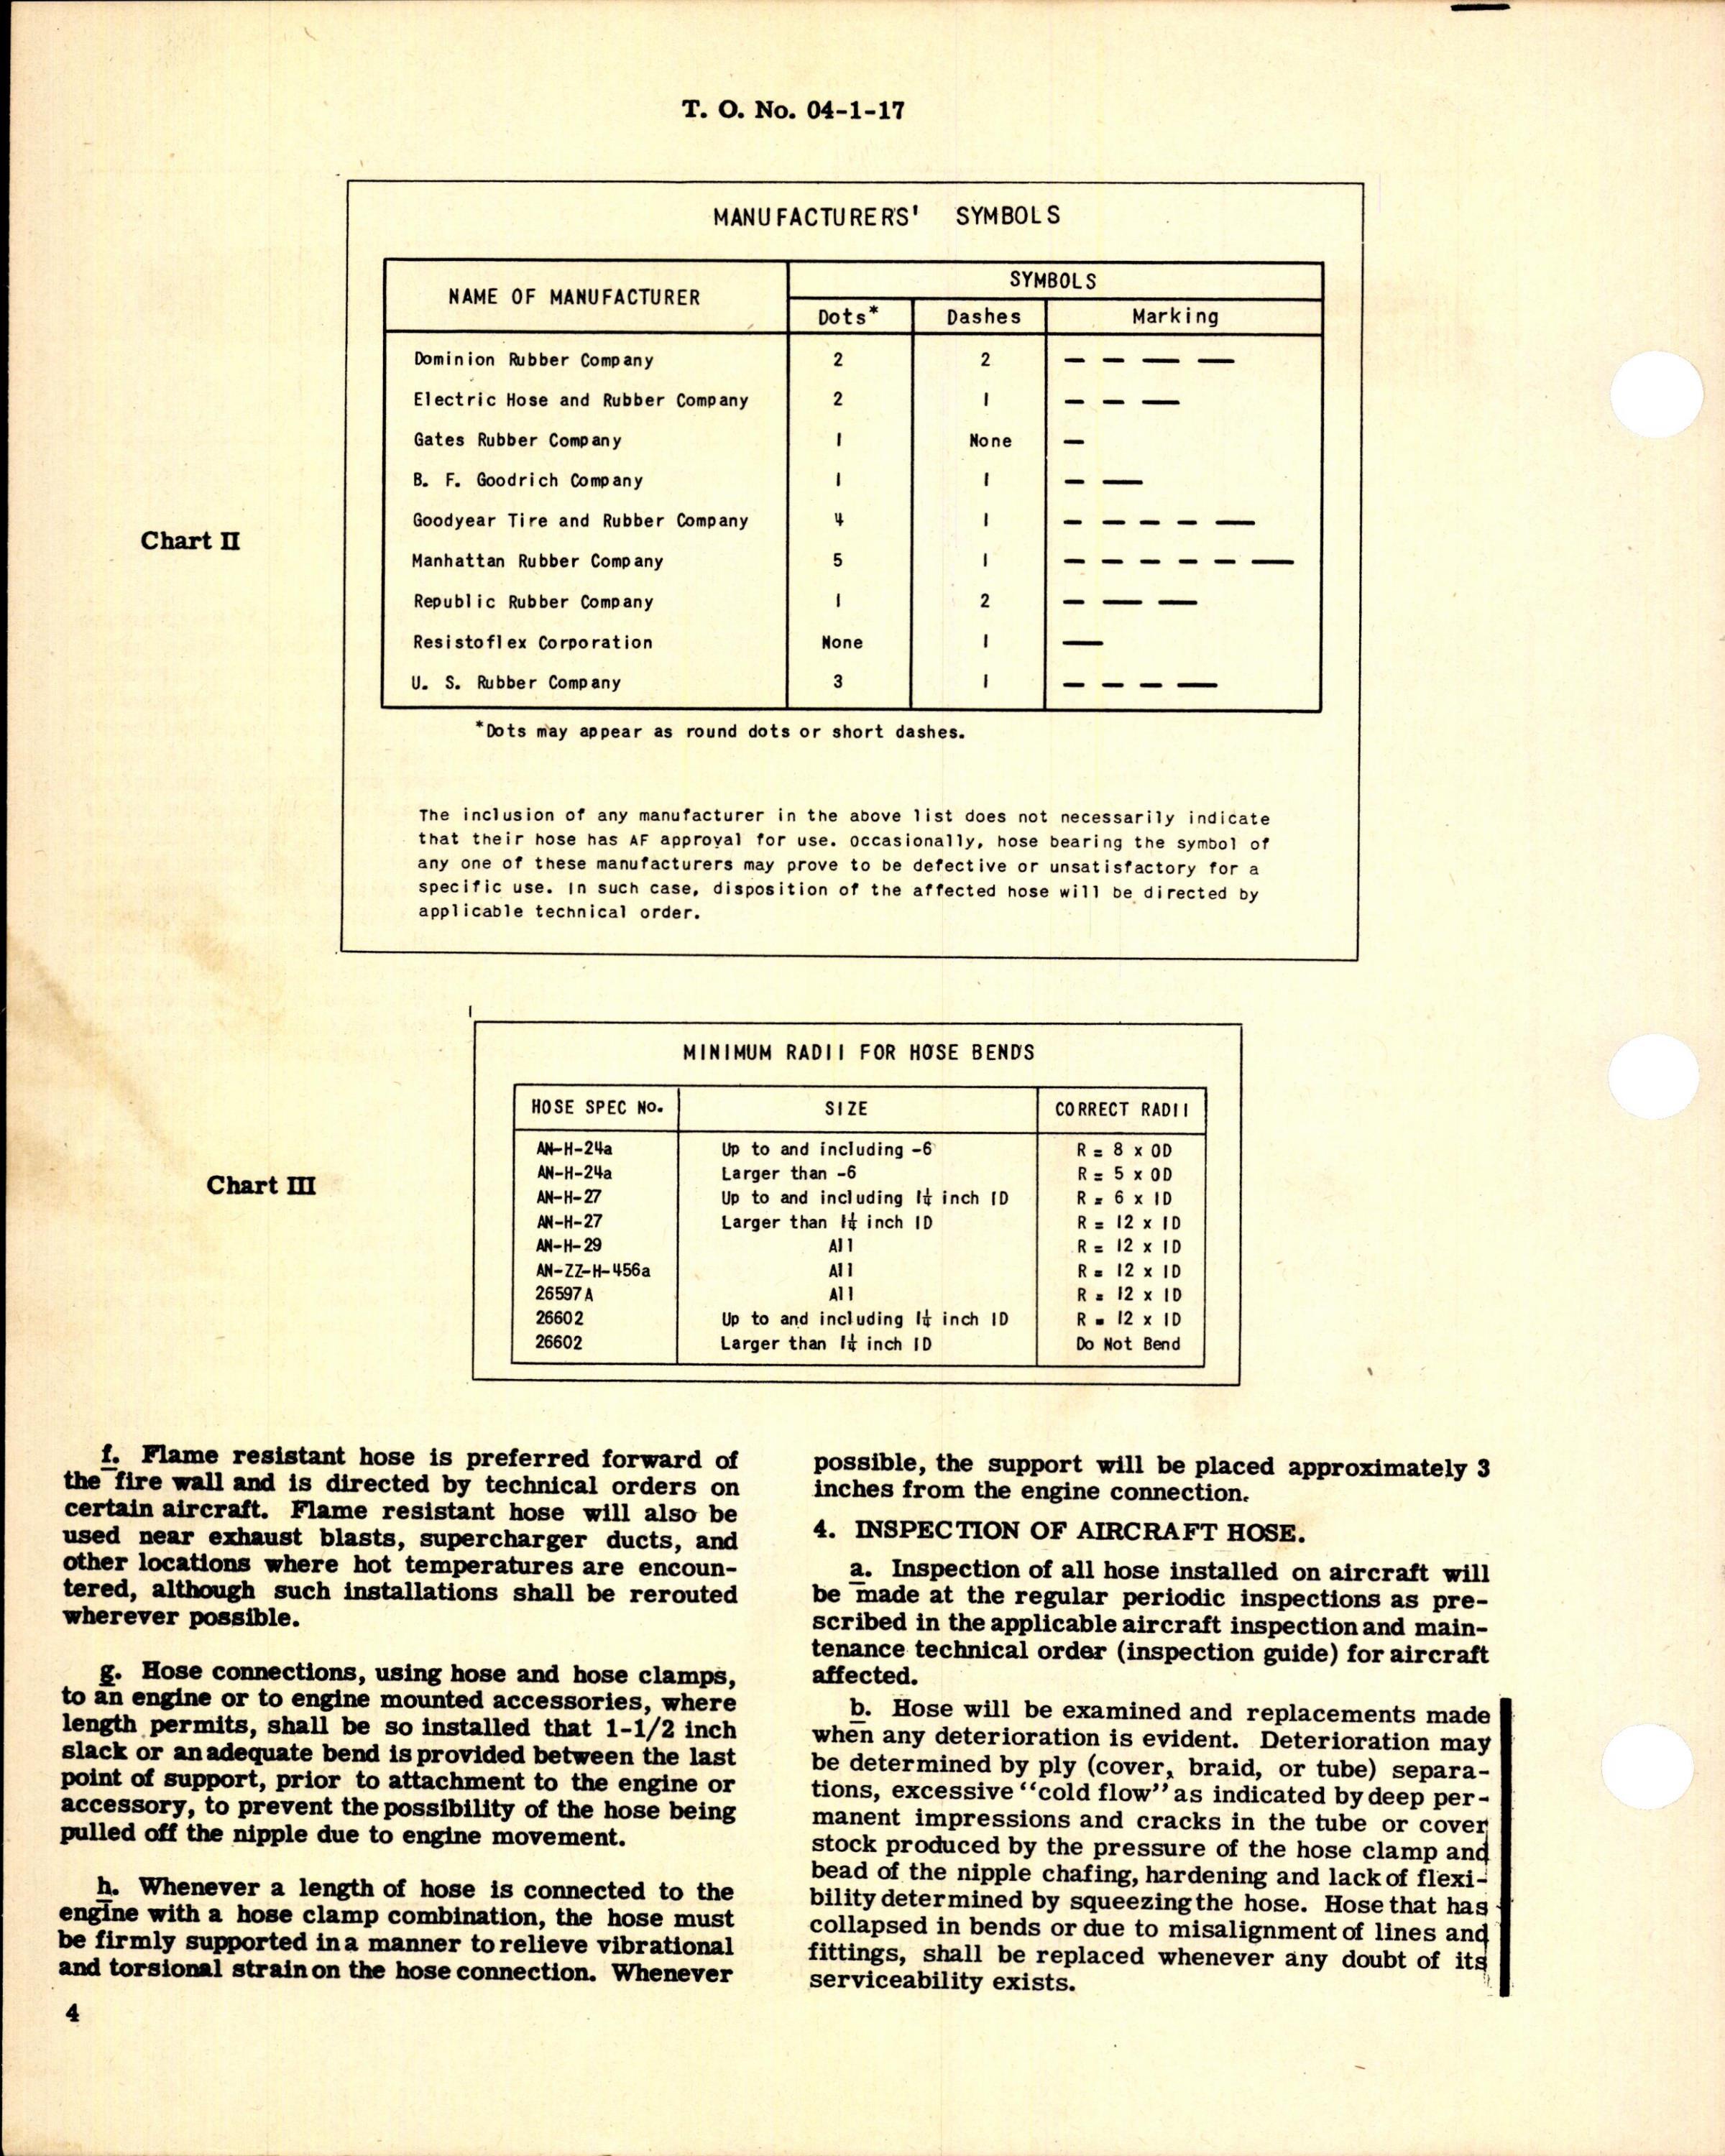 Sample page 4 from AirCorps Library document: Identification, Installation, Inspection, Shipping, & Storage of Aircraft Hose 